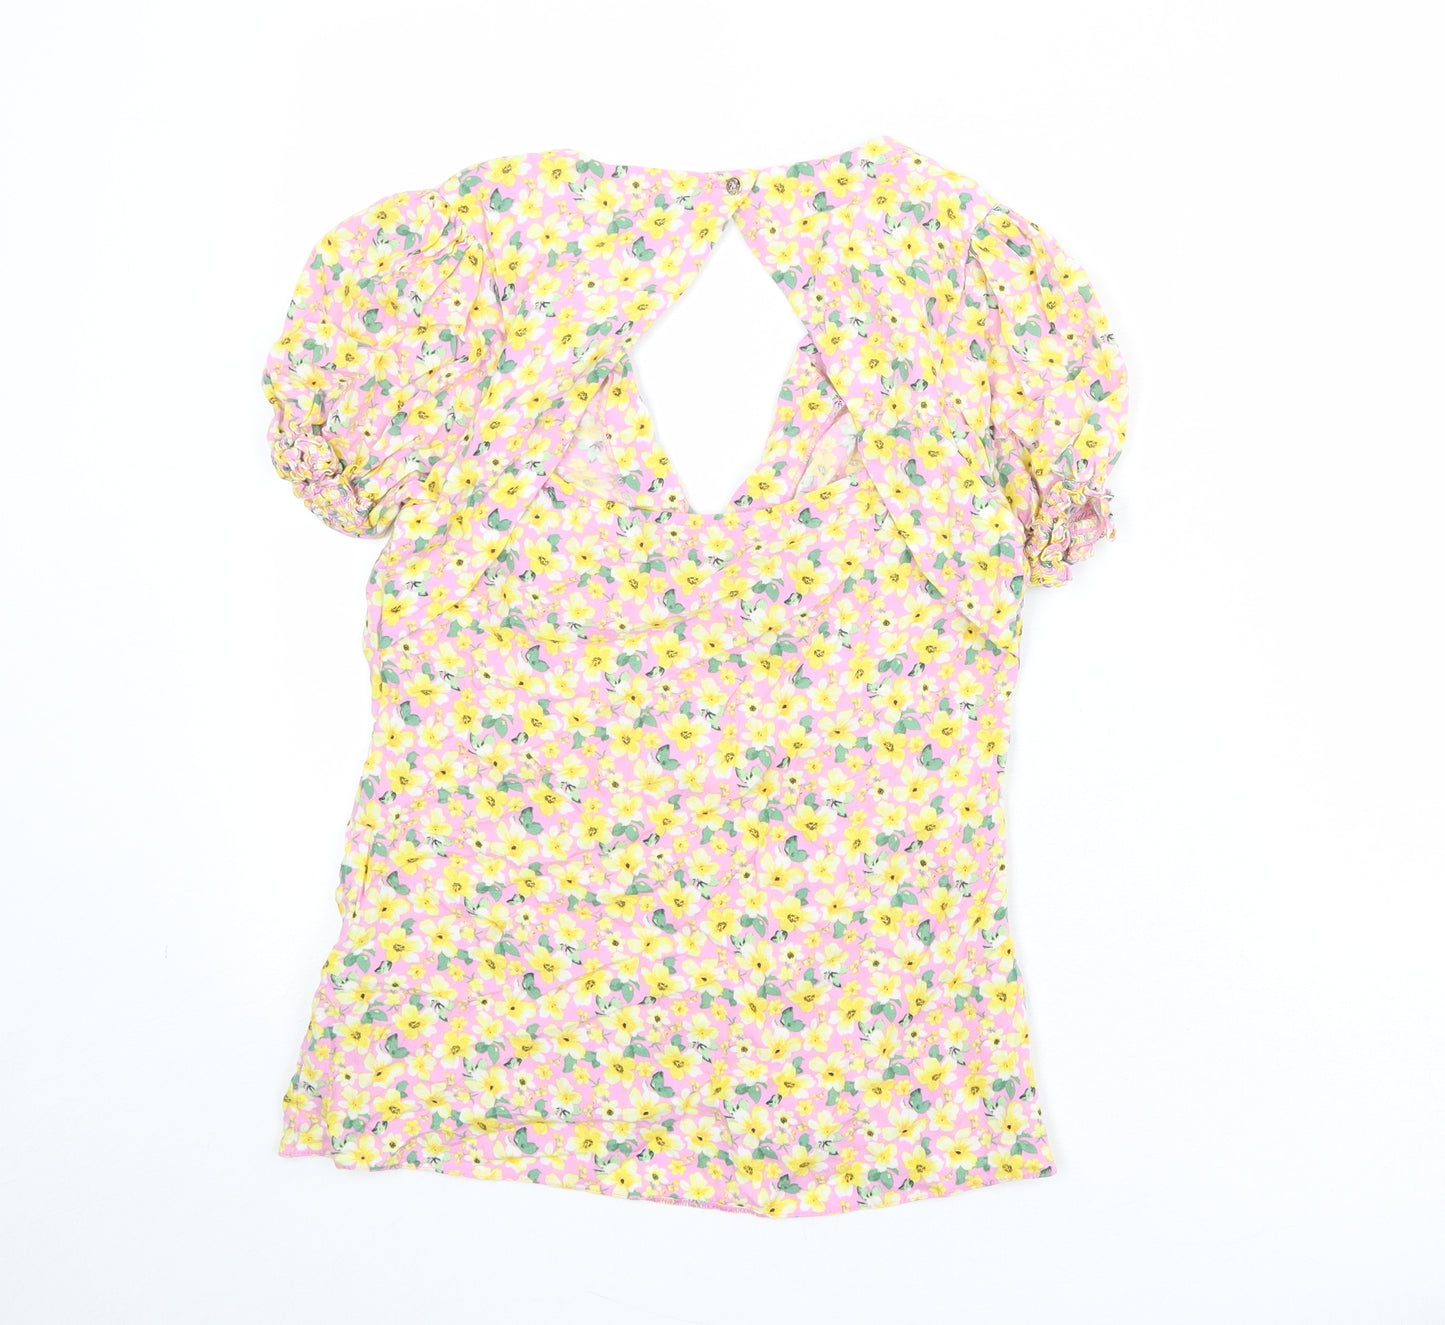 New Look Womens Multicoloured Floral Viscose Basic Blouse Size 8 V-Neck - Cut Out Back Detail